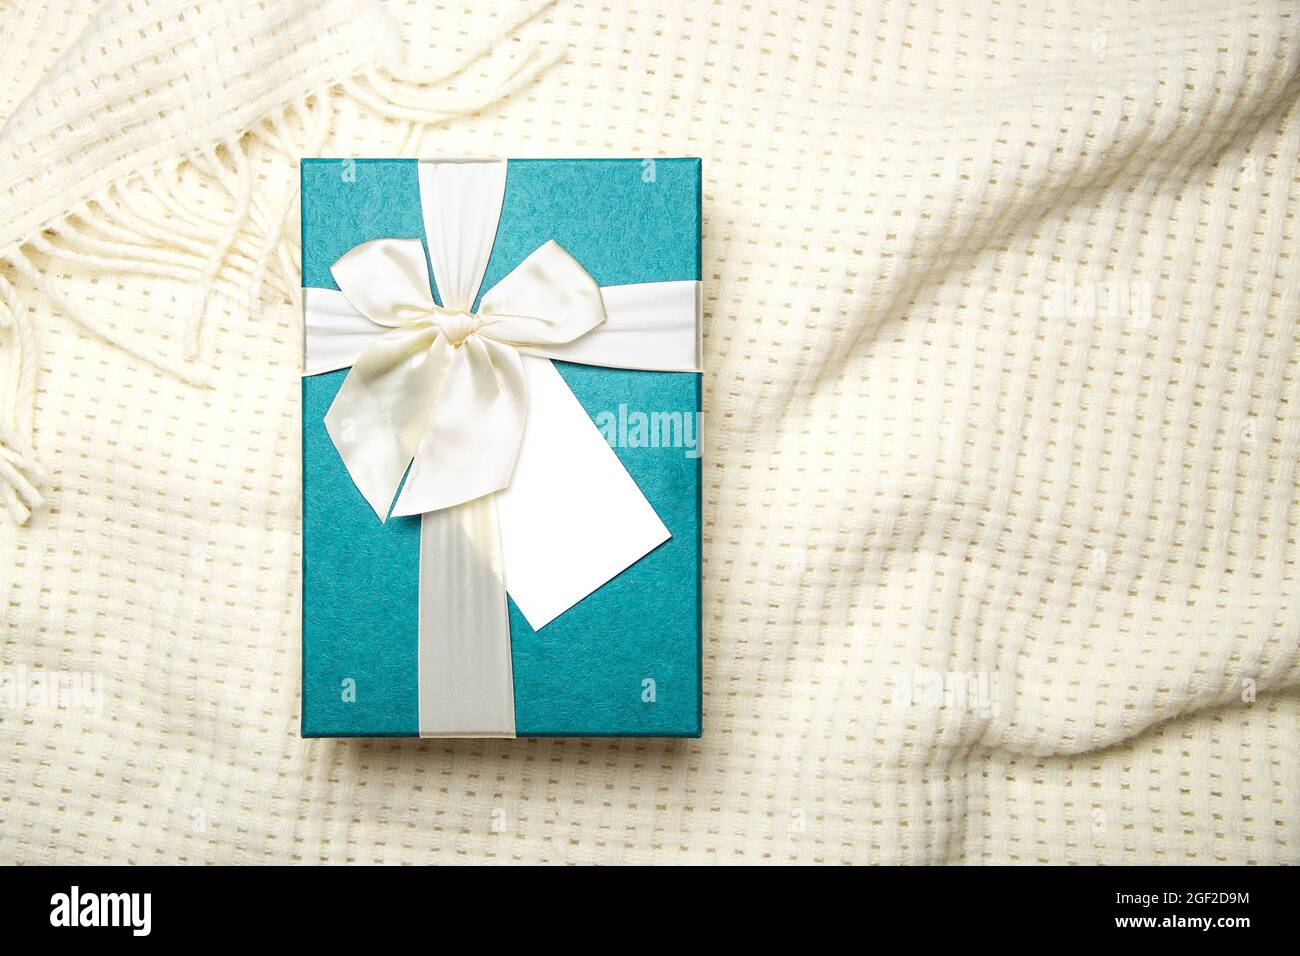 Gift box with empty white blank gift tag mock up. Christmas, birthday or wedding gift. Stock Photo